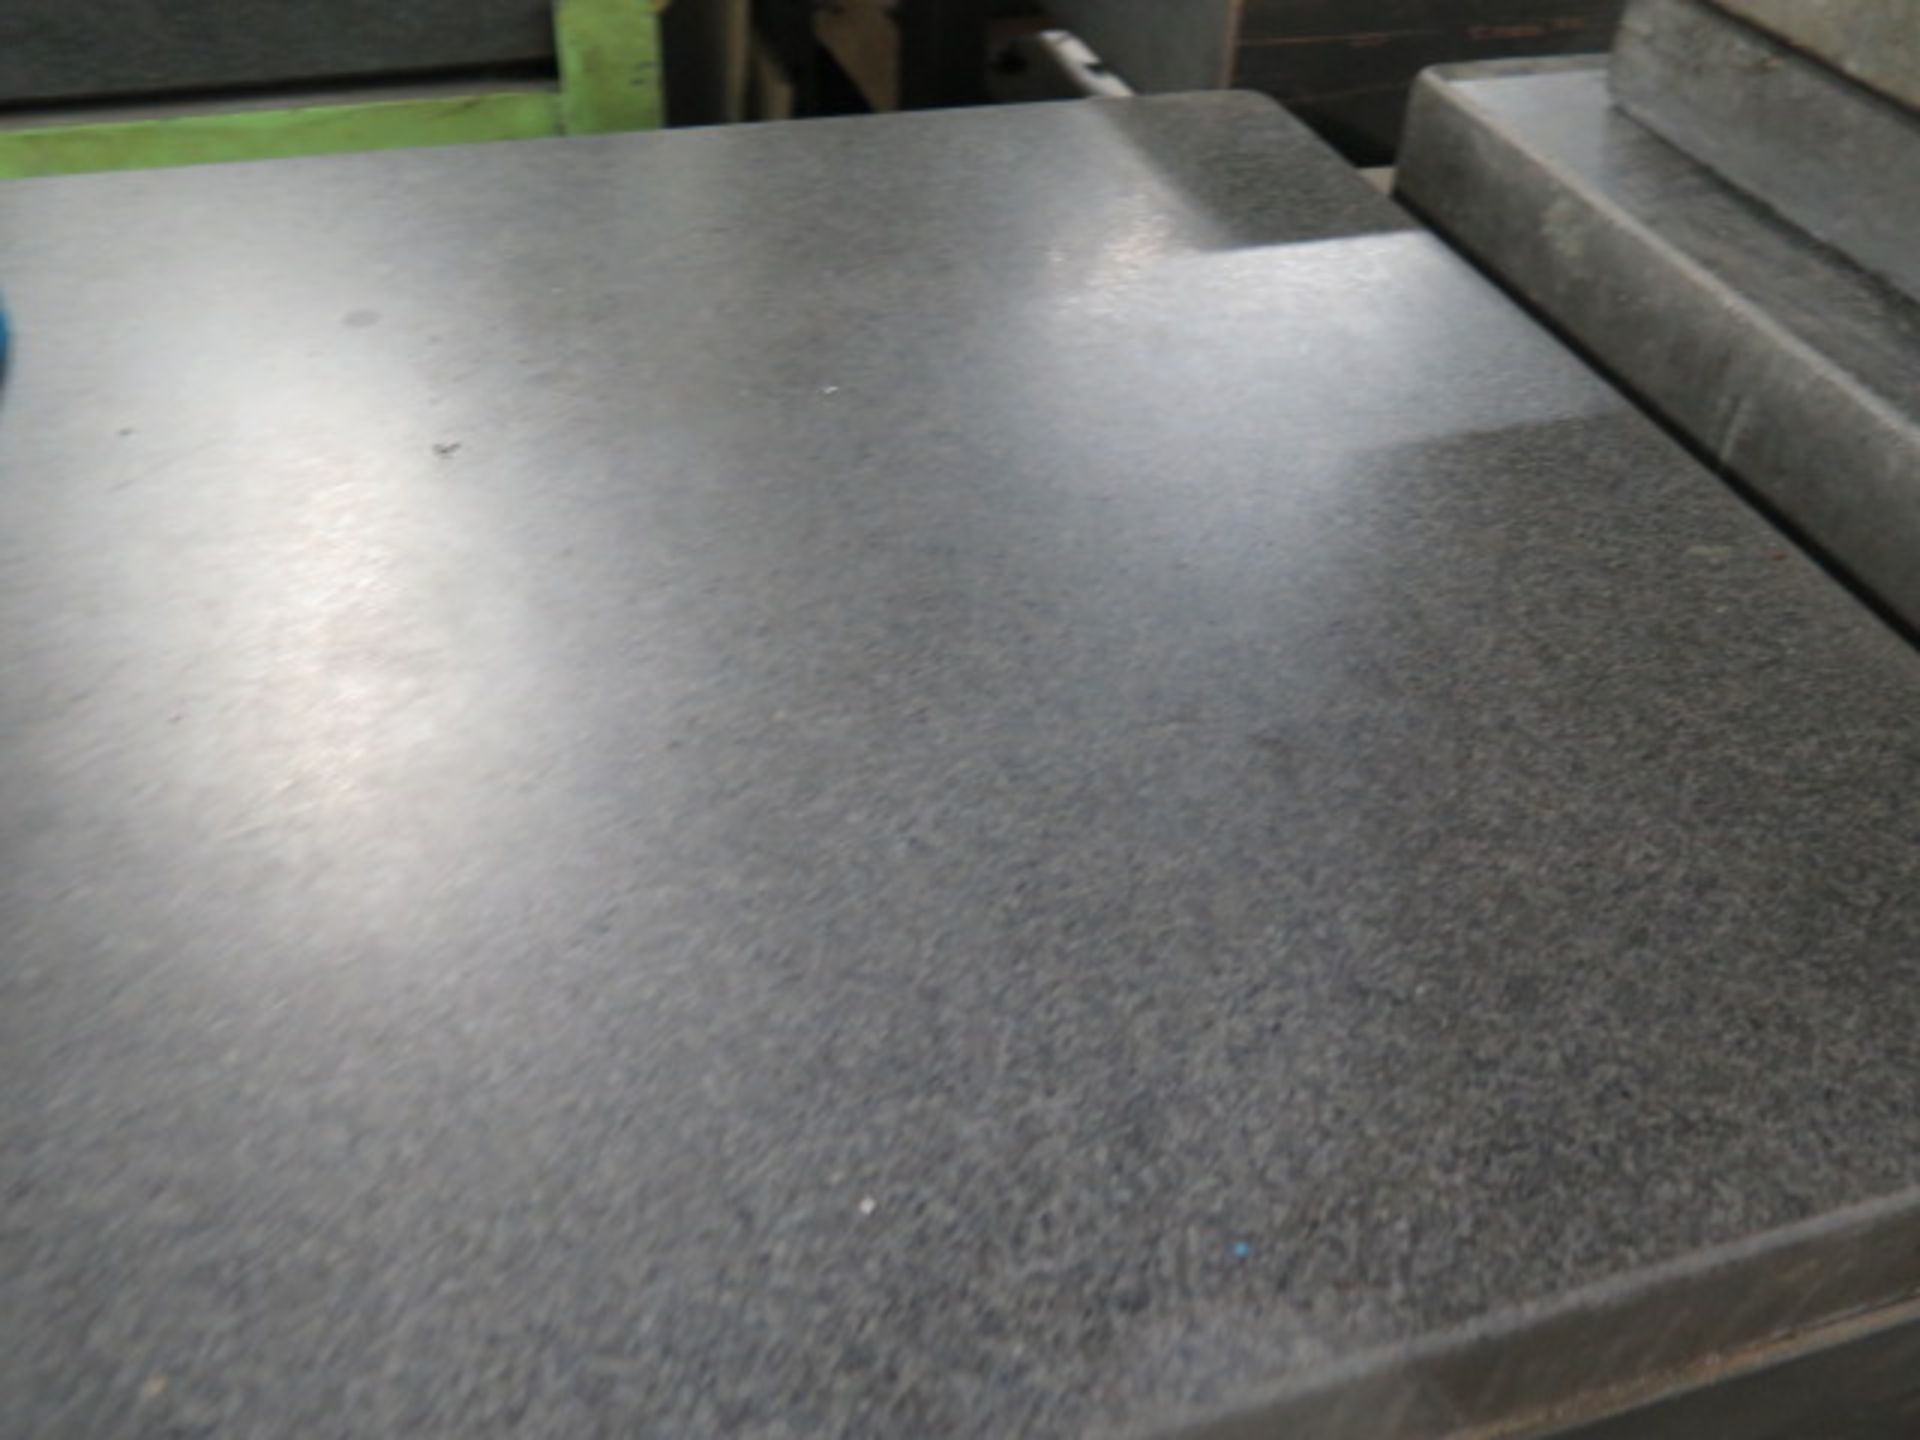 Mojave 24" x 36" x 3 1/2" Granite Surface Plate w/ Rolling Stand (SOLD AS-IS - NO WARRANTY) - Image 3 of 5